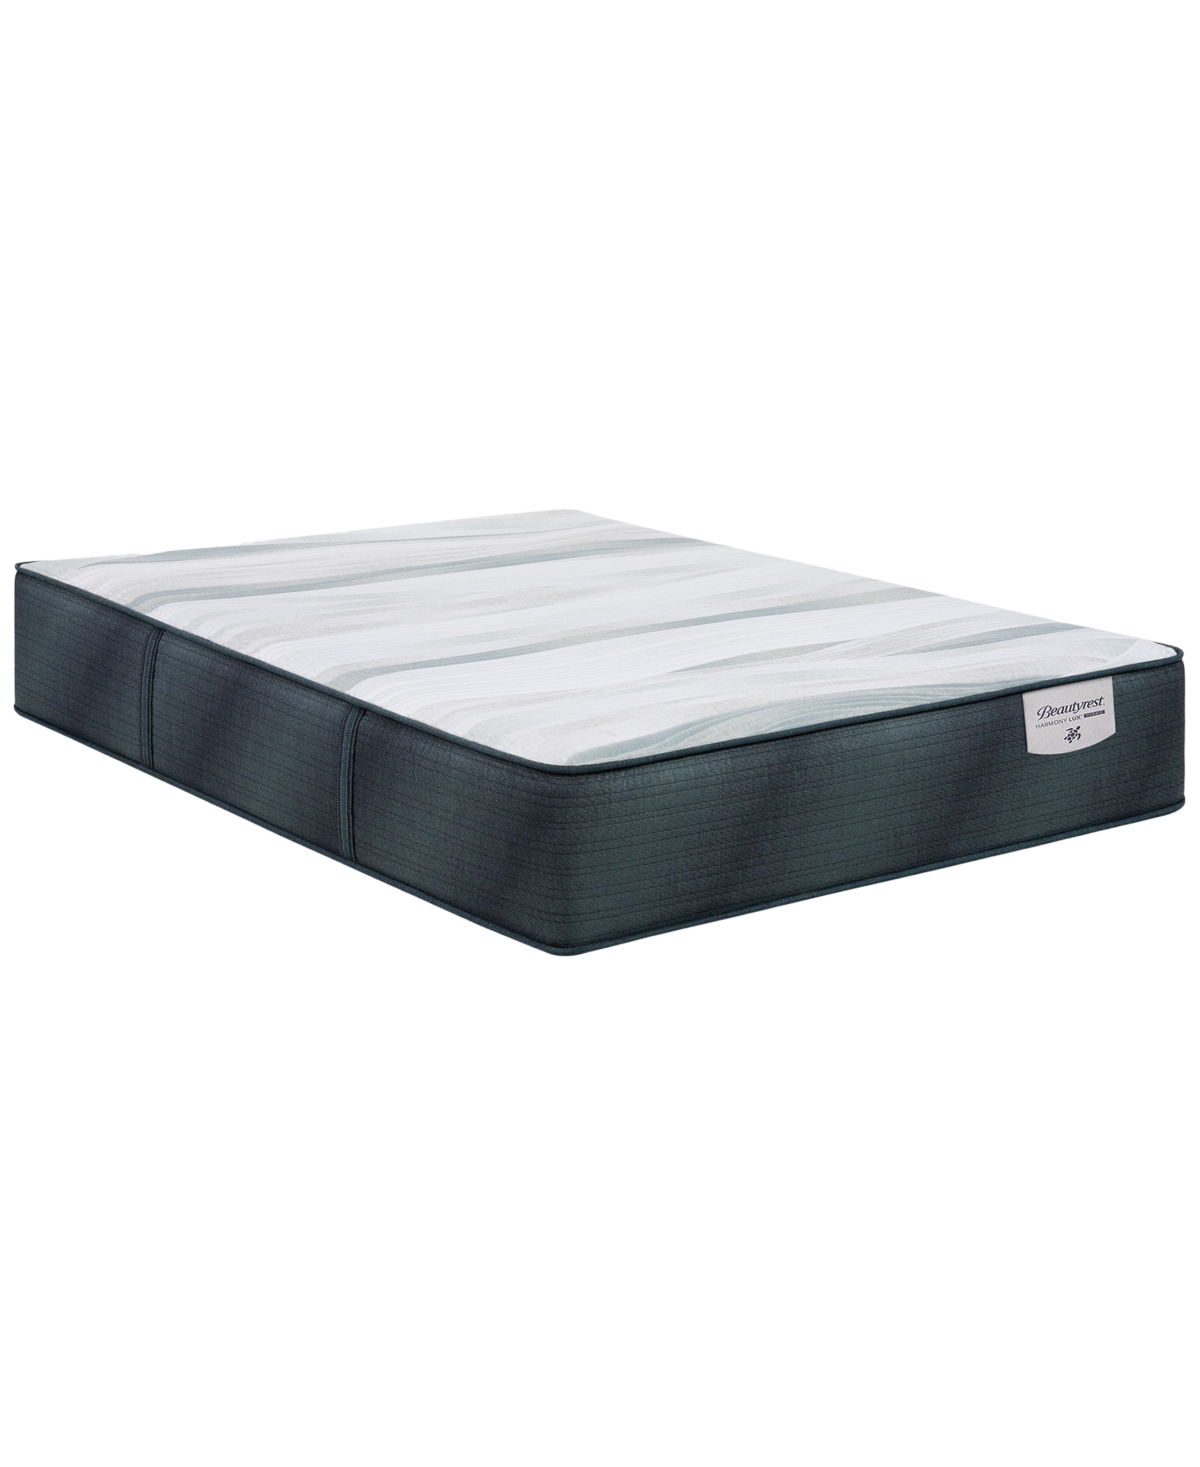 Beautyrest Harmony Lux Hybrid Ocean View Island 13" Firm Mattress In No Color